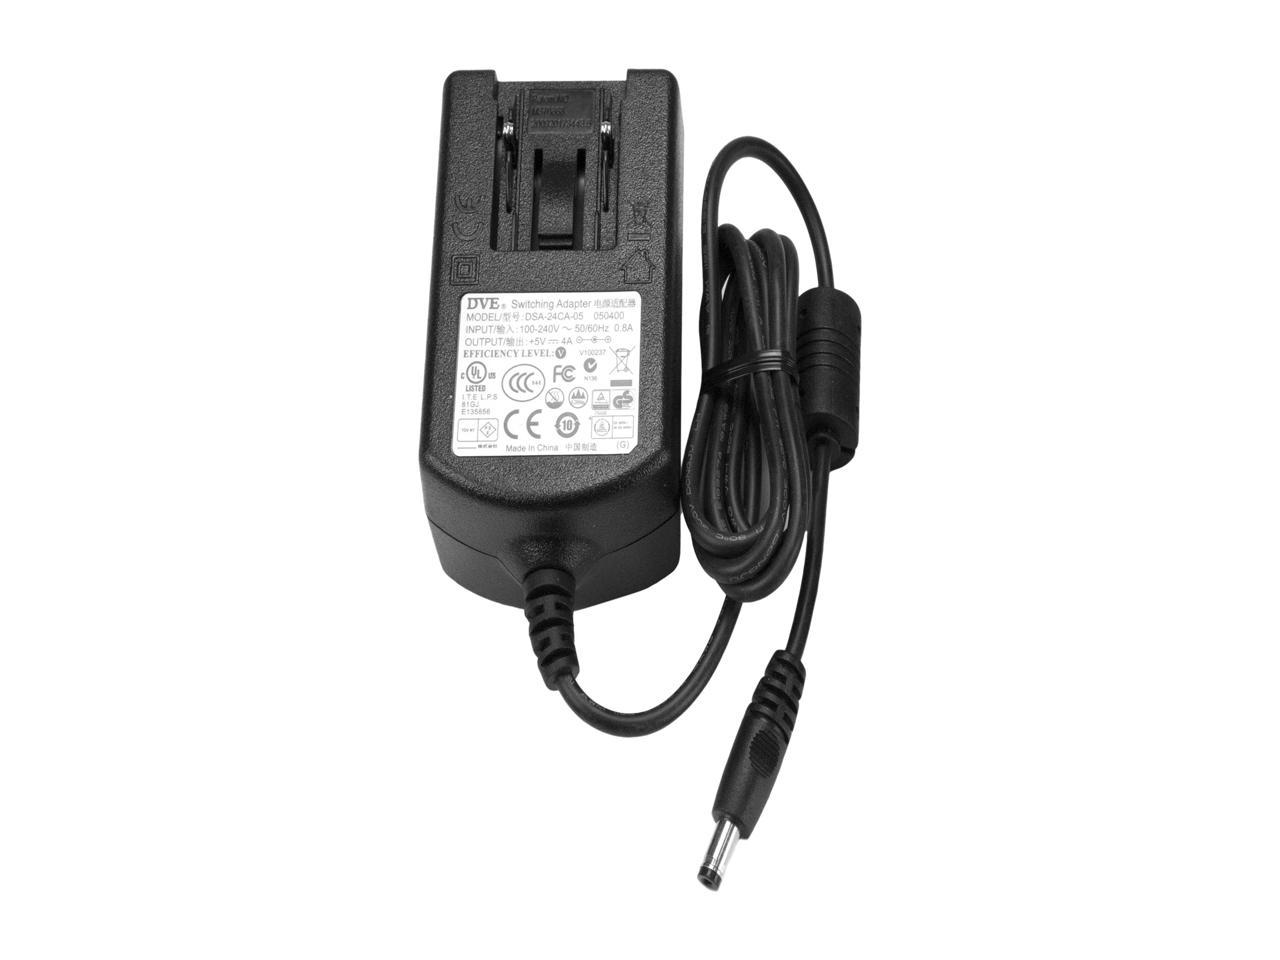 StarTech SVA5M4NEUA Replacement 5V DC Power Adapter - 5 Volts, 4 Amps - image 2 of 4